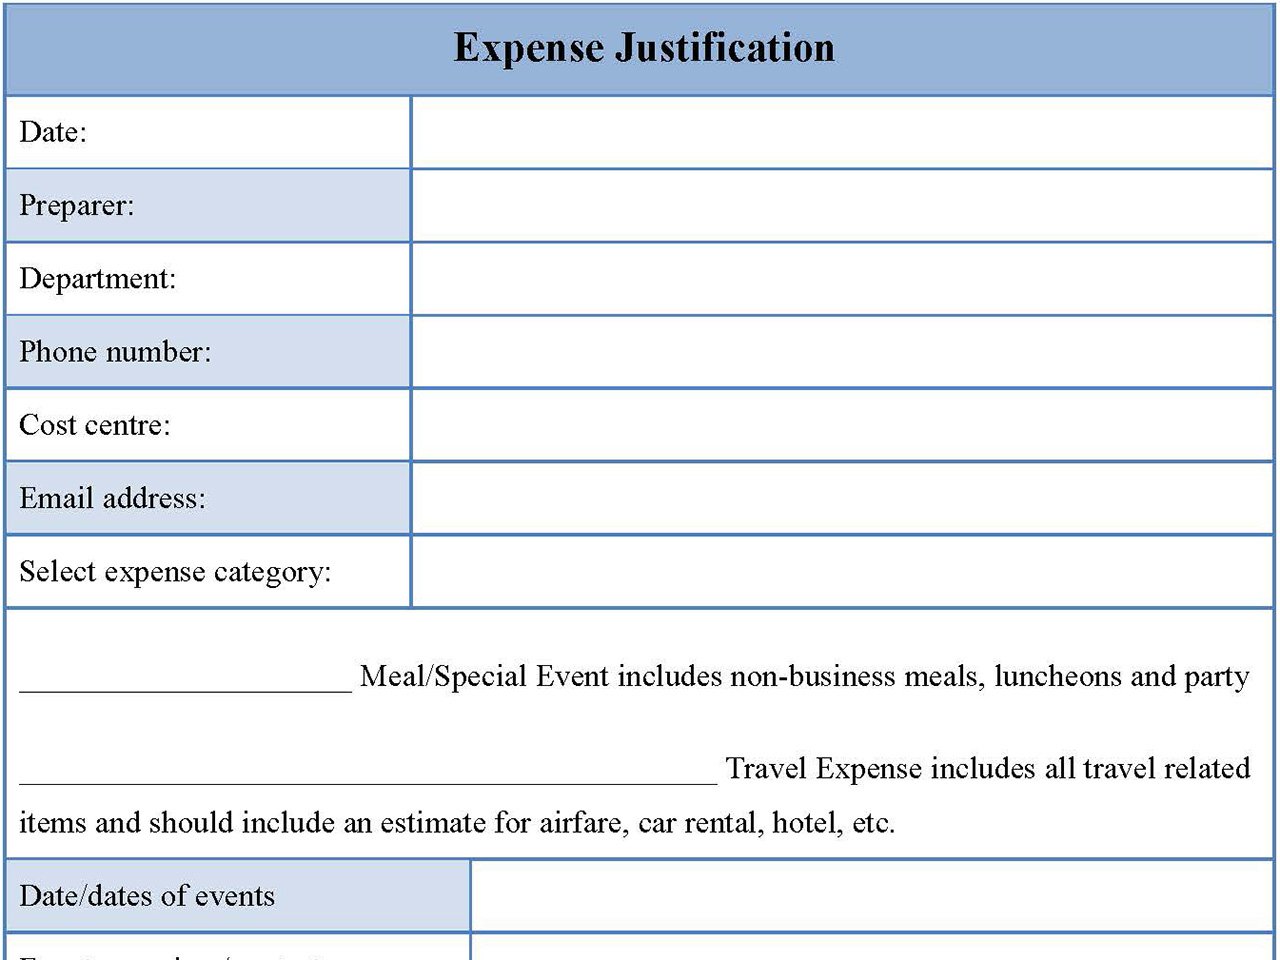 Expense Justification Form